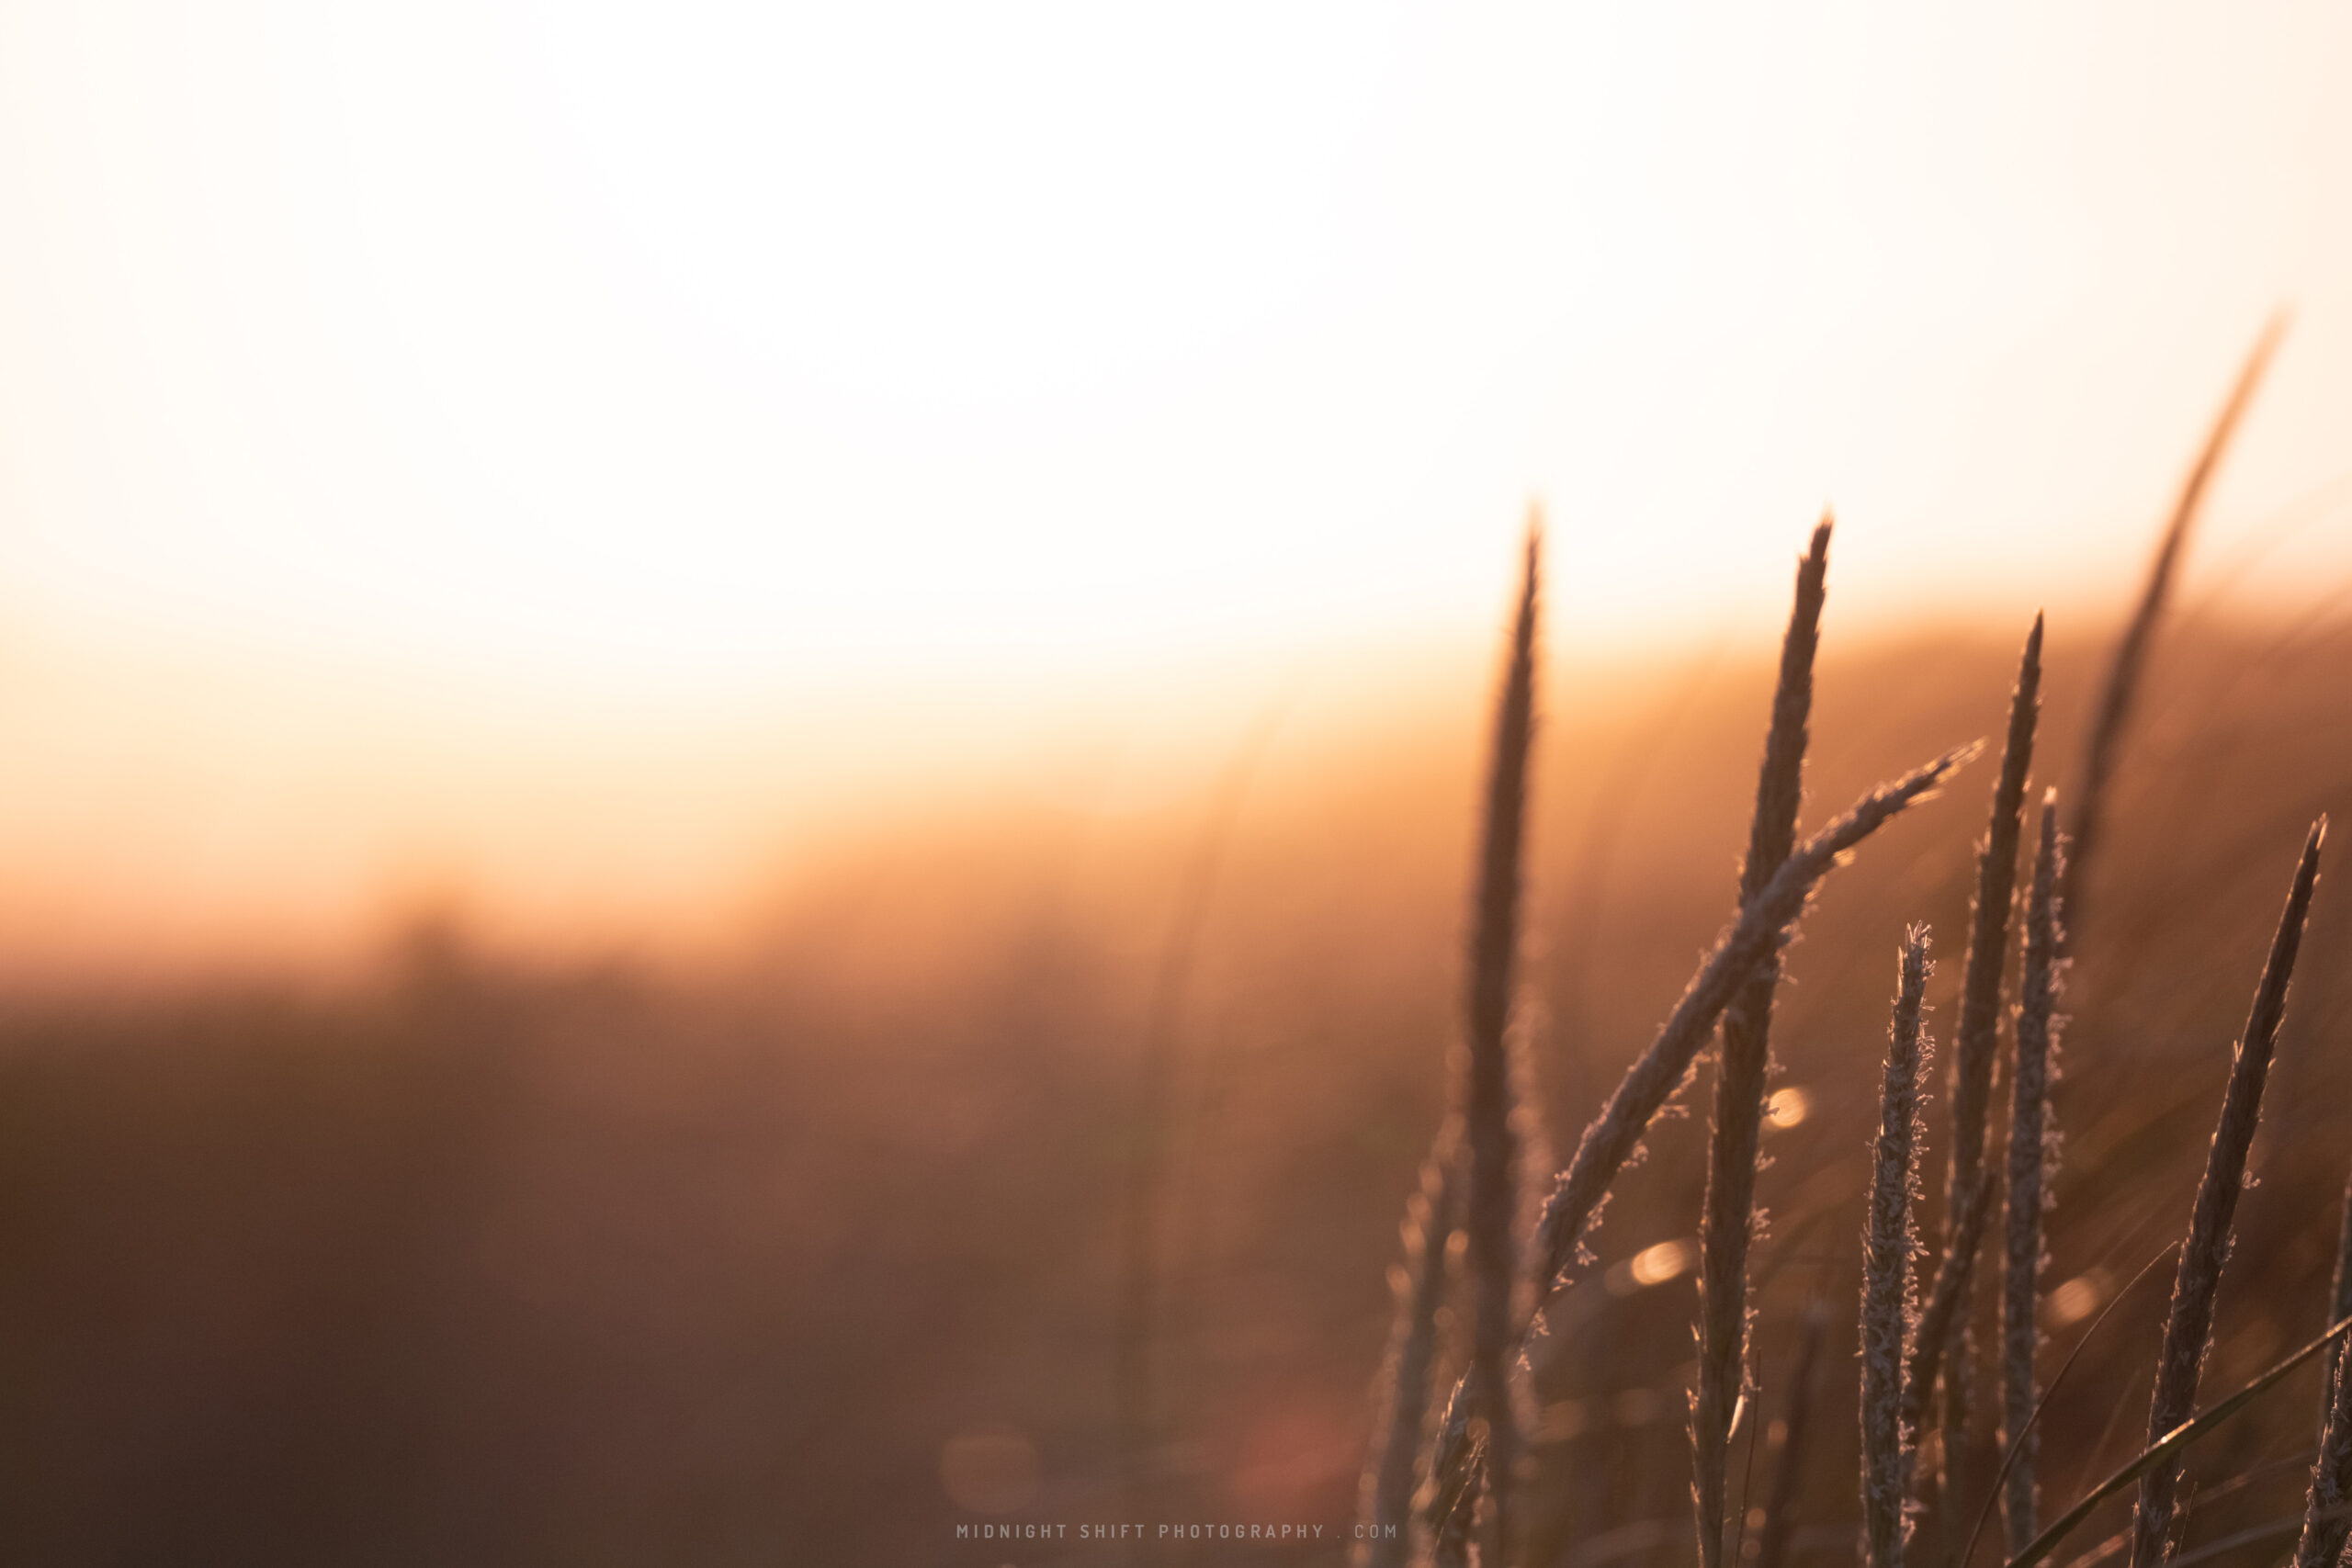 The sun sets behind some tall grass at the beach